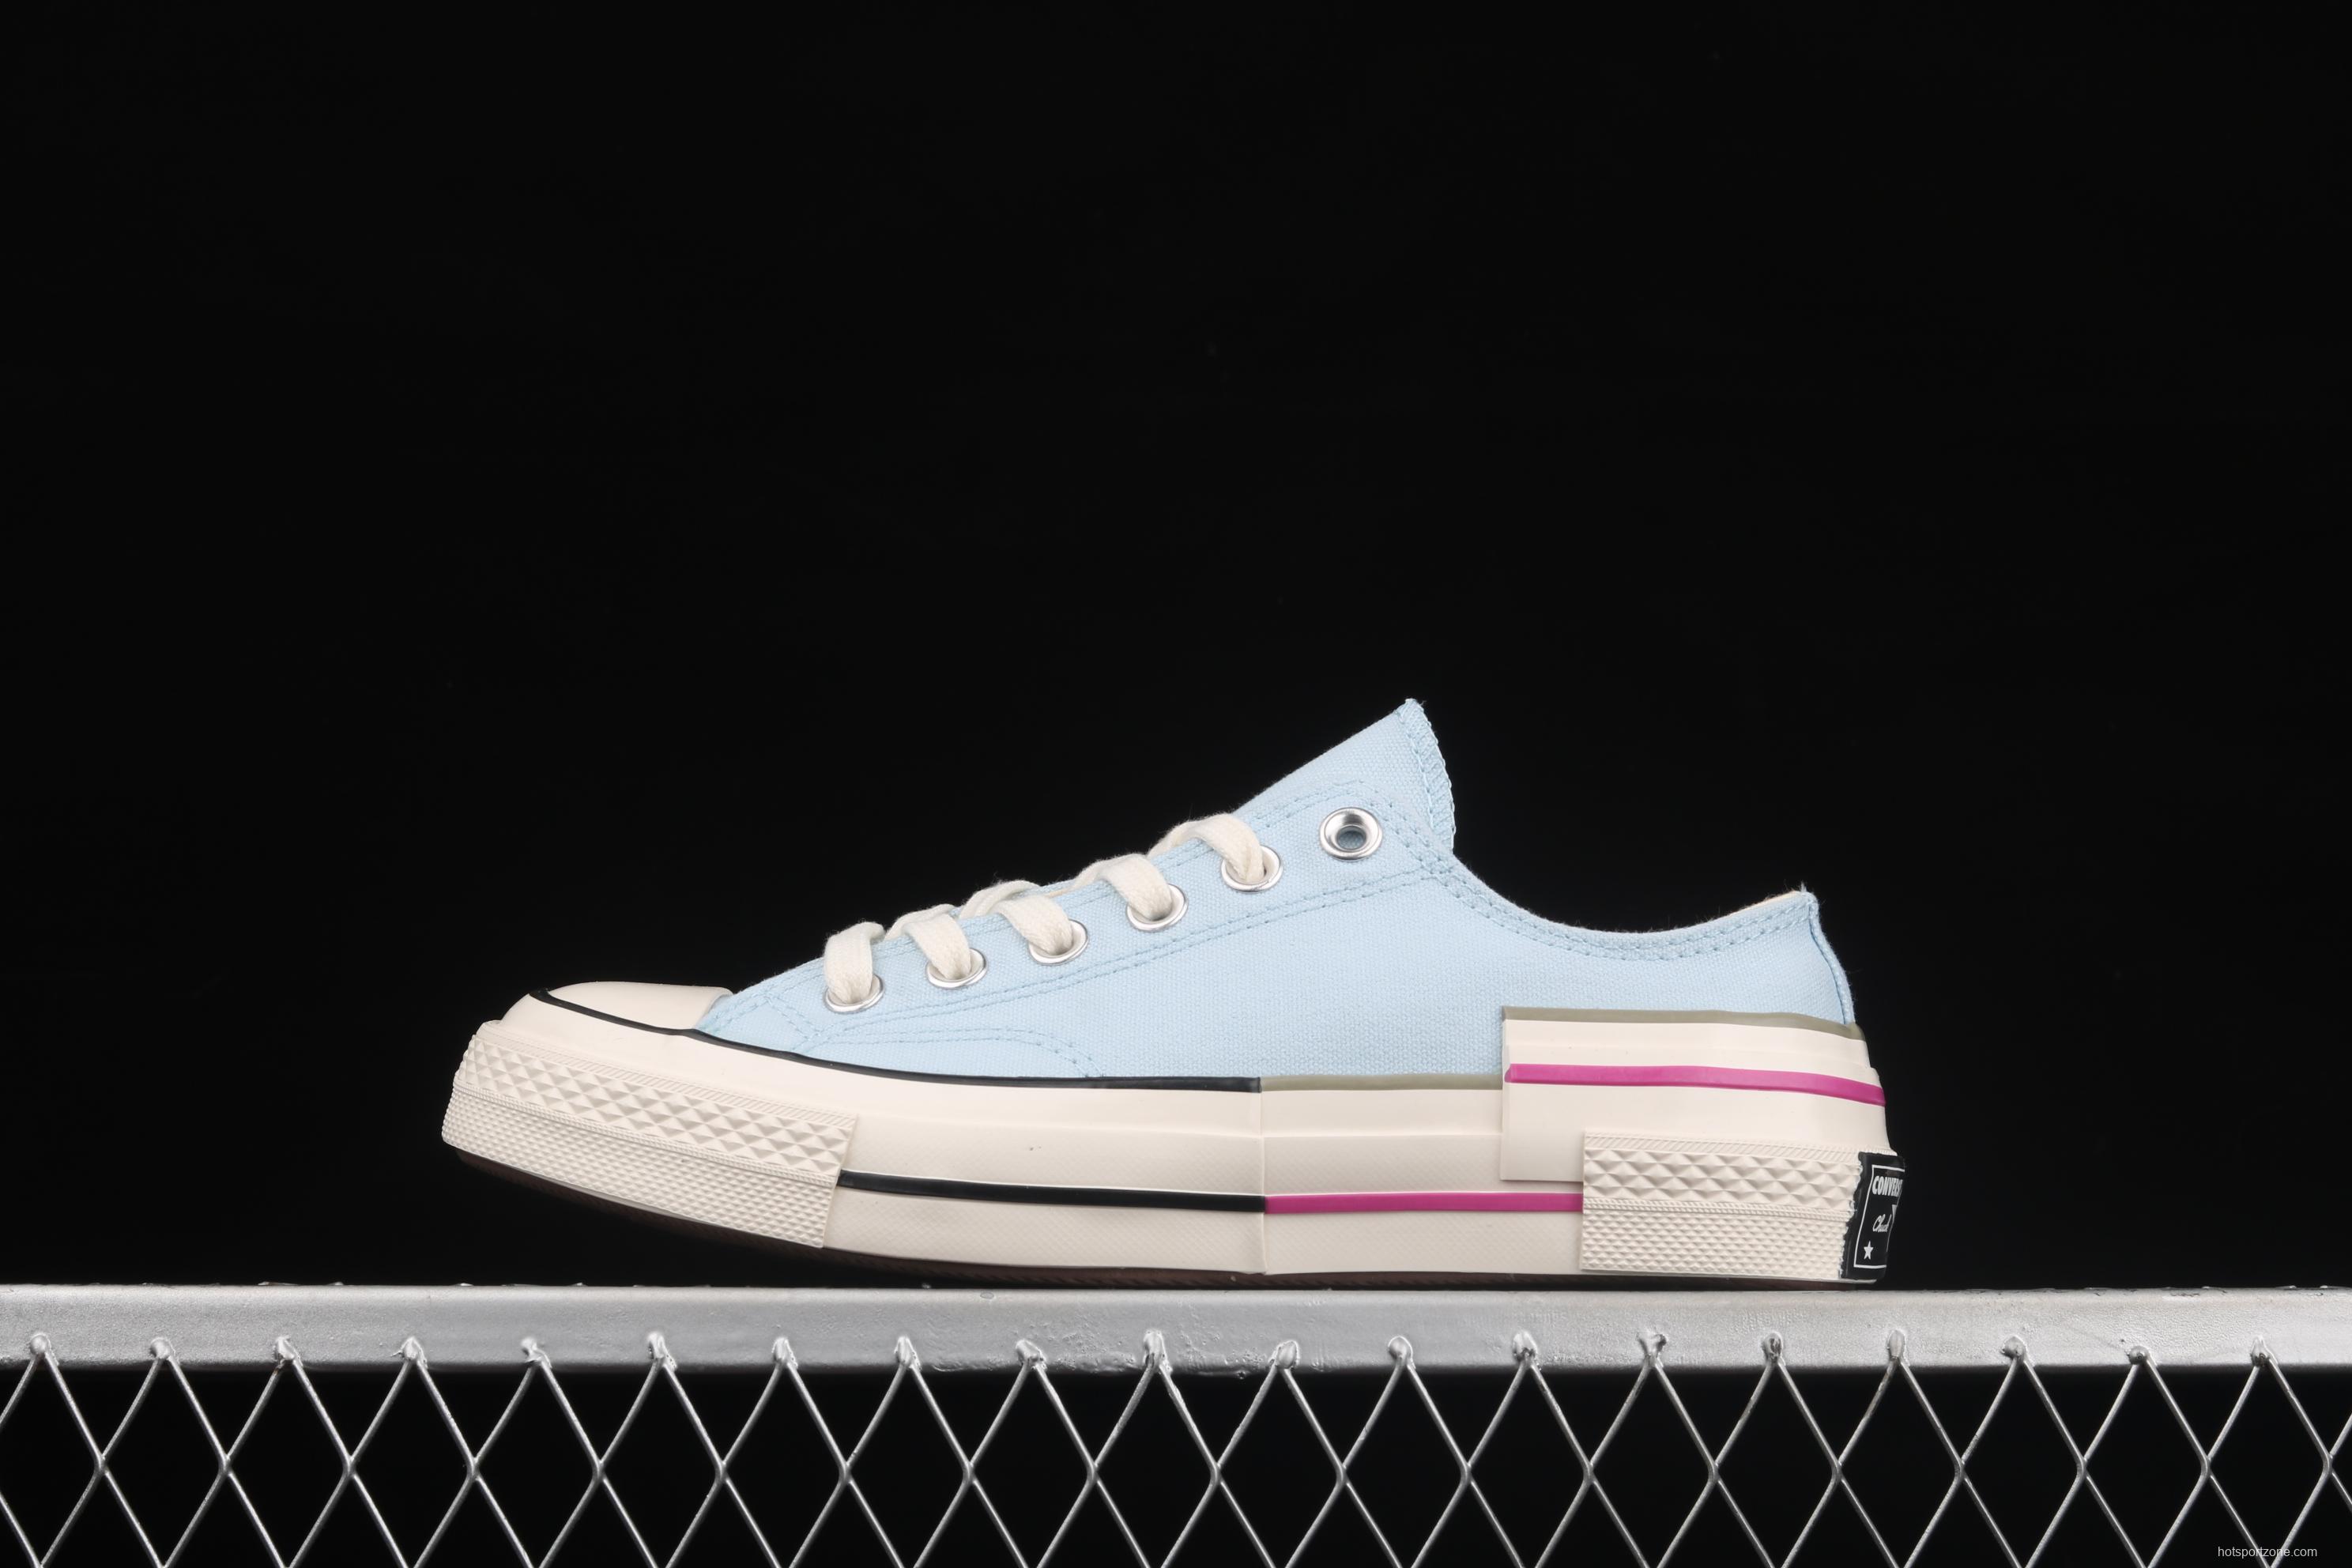 Converse 1970 S Spring / Summer Series Spring Garden structure Wind low side Leisure Board shoes 570789C